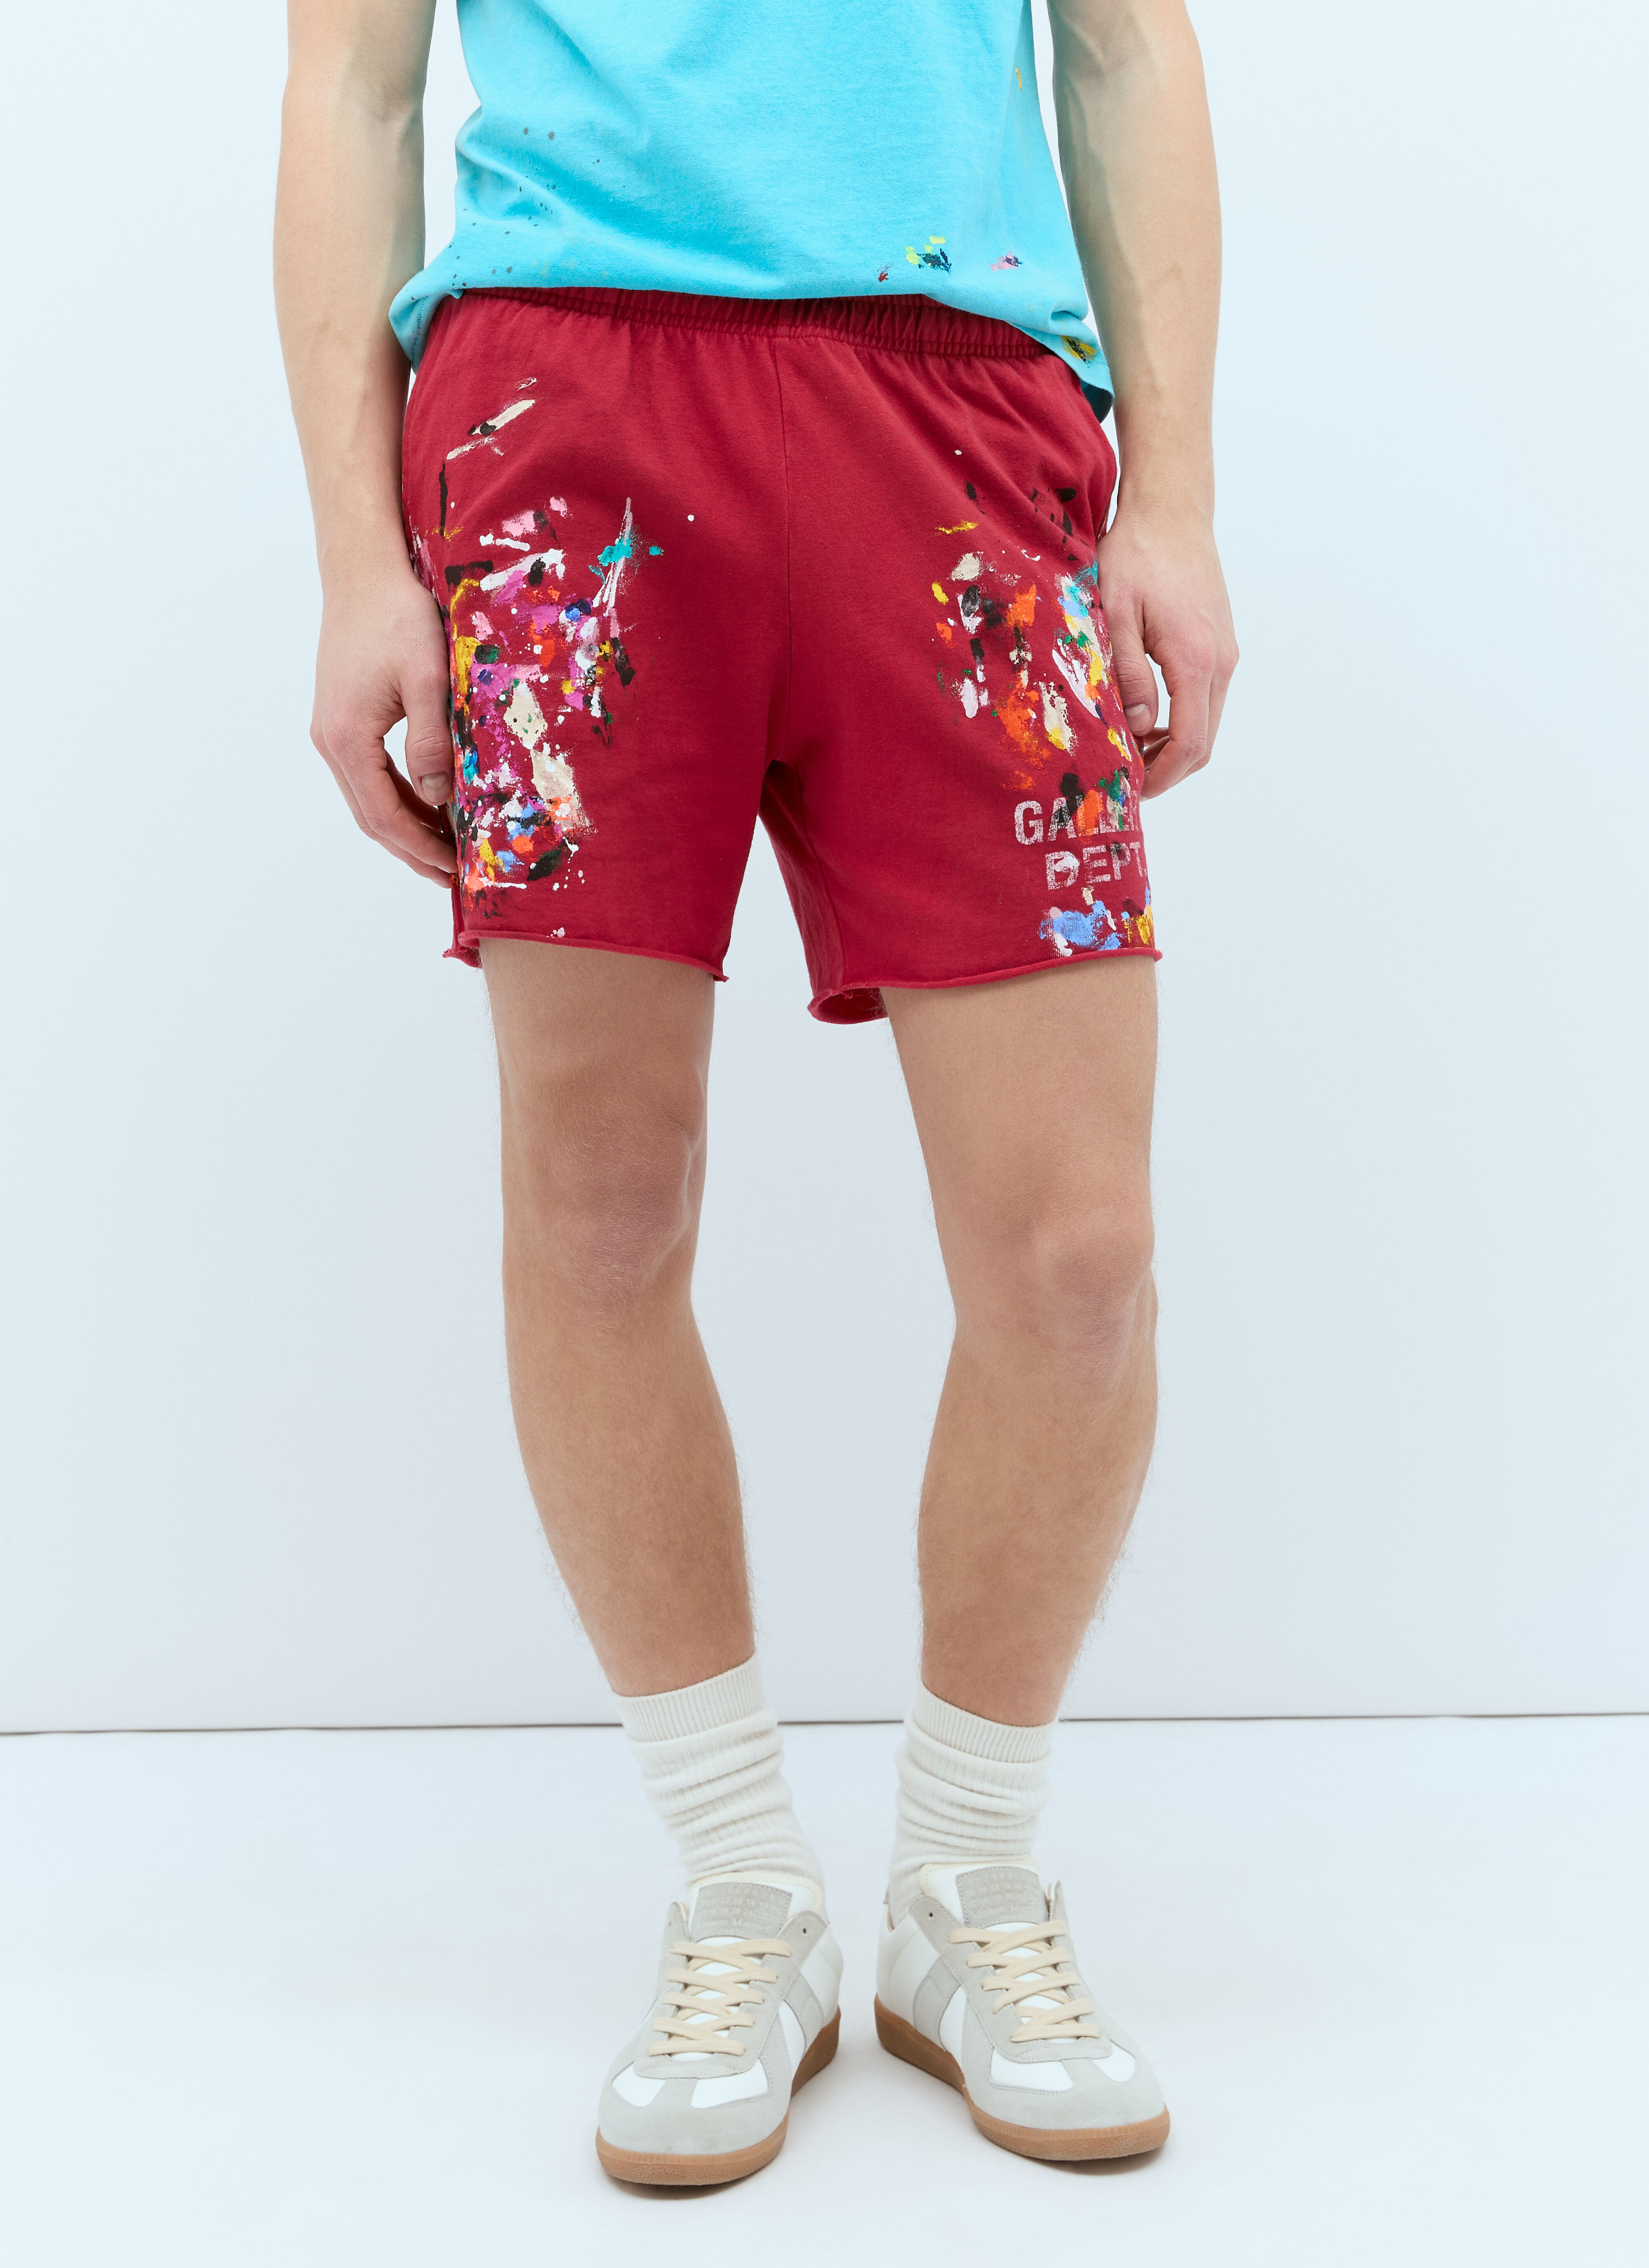 Gallery Dept. Insomnia Shorts White gdp0153021